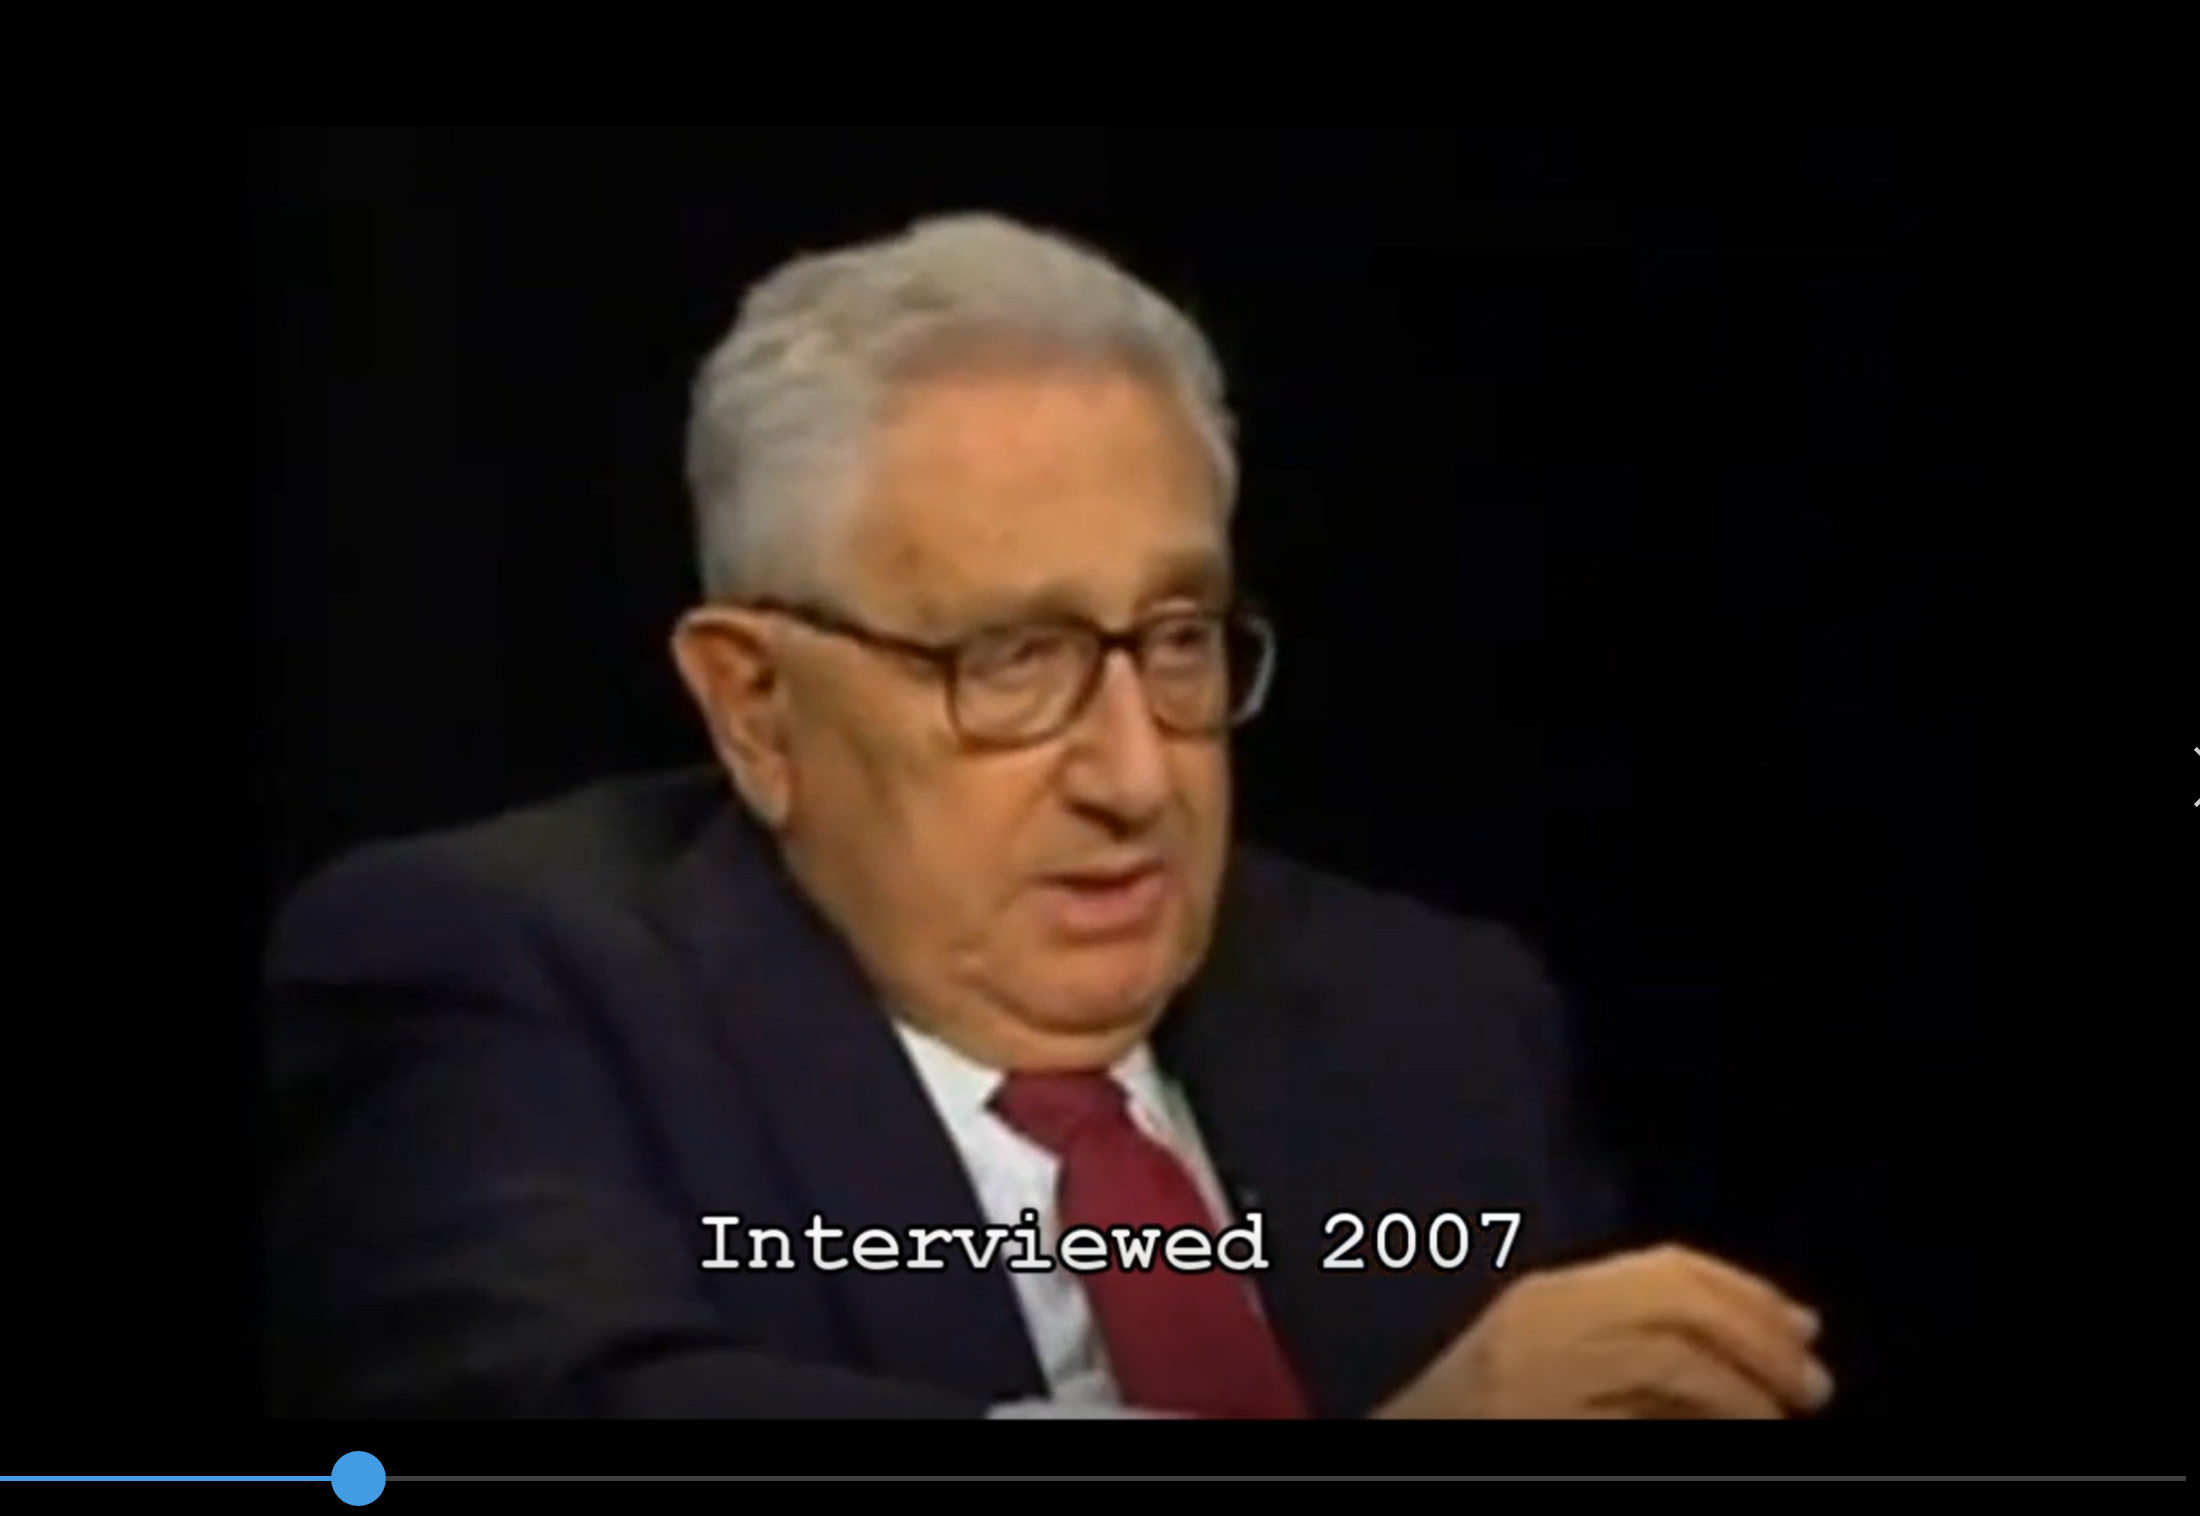 Henry Kissinger. (Compiled Aug. 20, 2020). Compilation of his promotion of a new world order ca. 2007. Patriots4Truth.